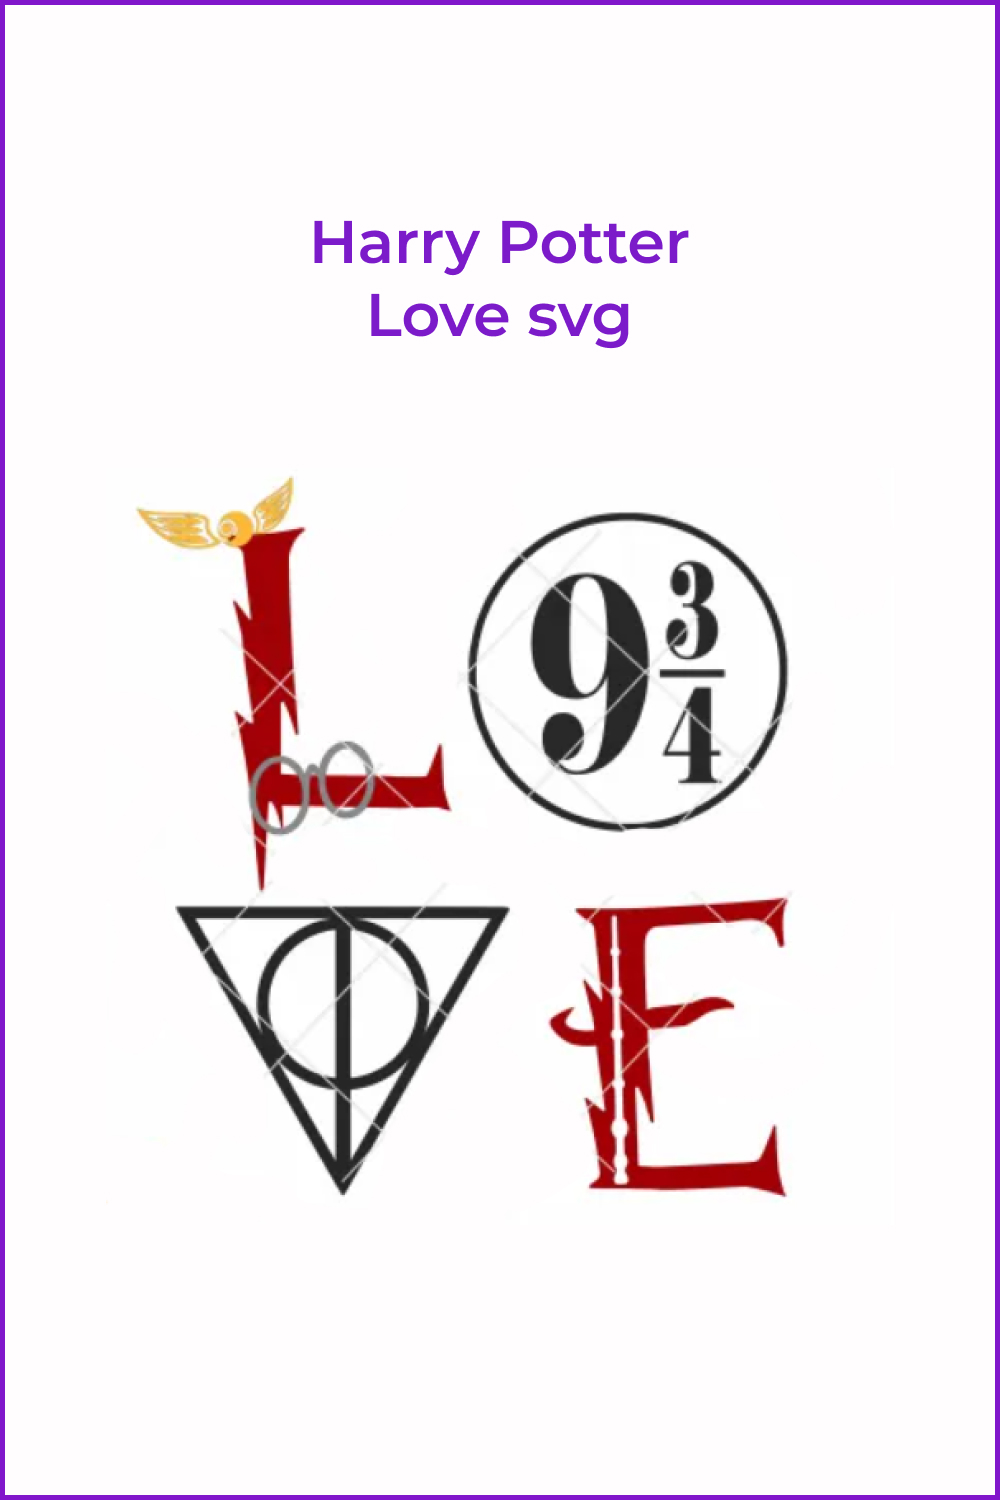 Word Love from the elements of the Harry Potter universe.